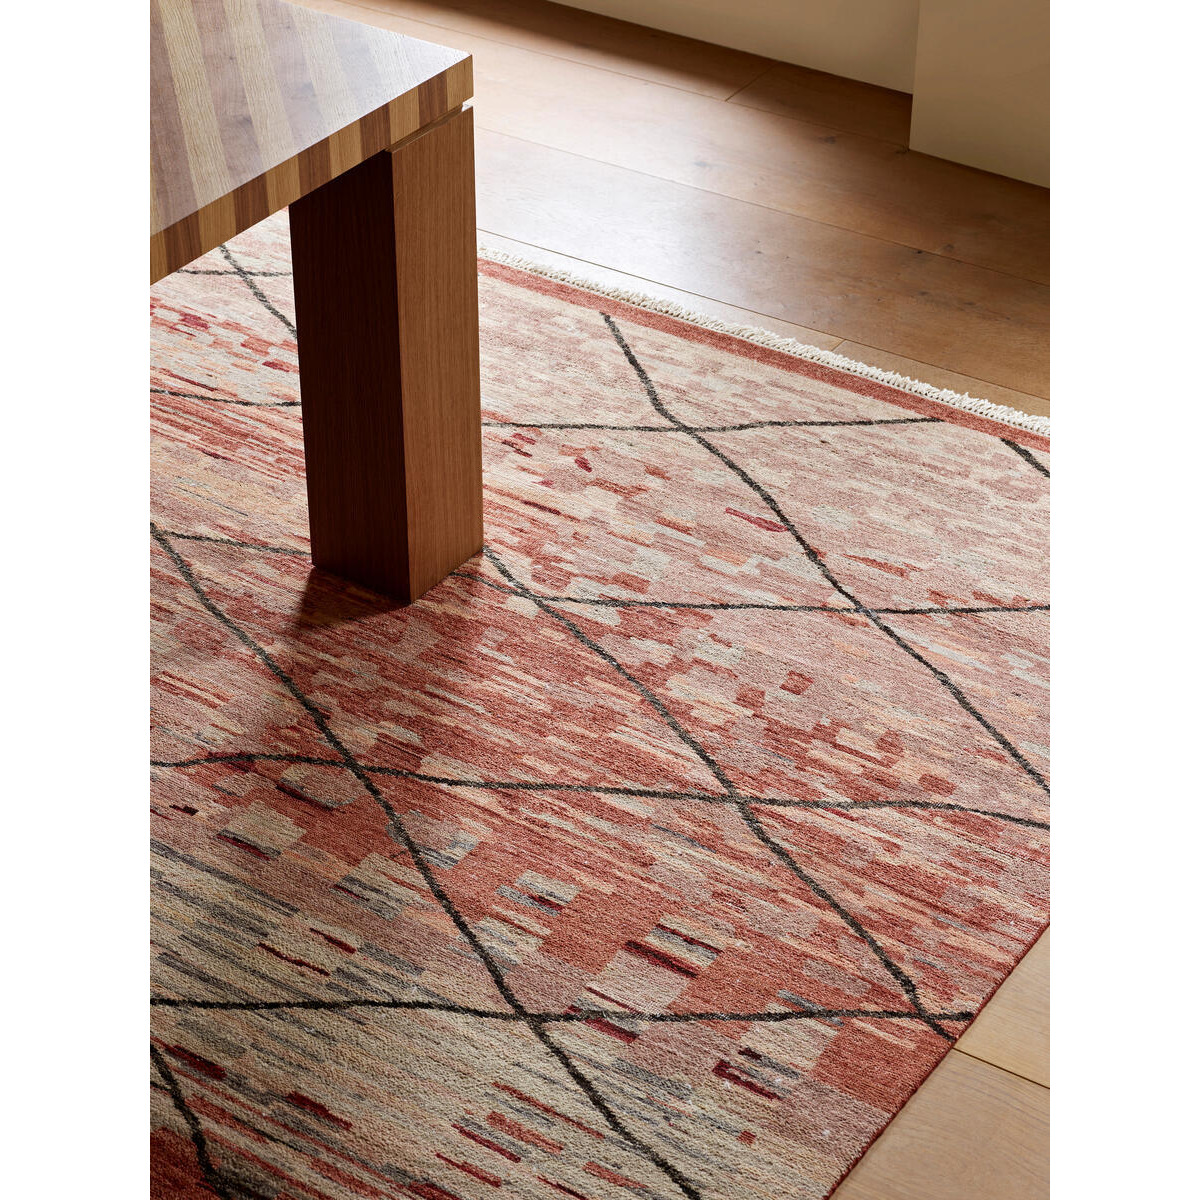 Vintage-Inspired Holstein Rug | Hand-Knotted Wool Rug | Neutral Tones with Diamond Pattern Overlay